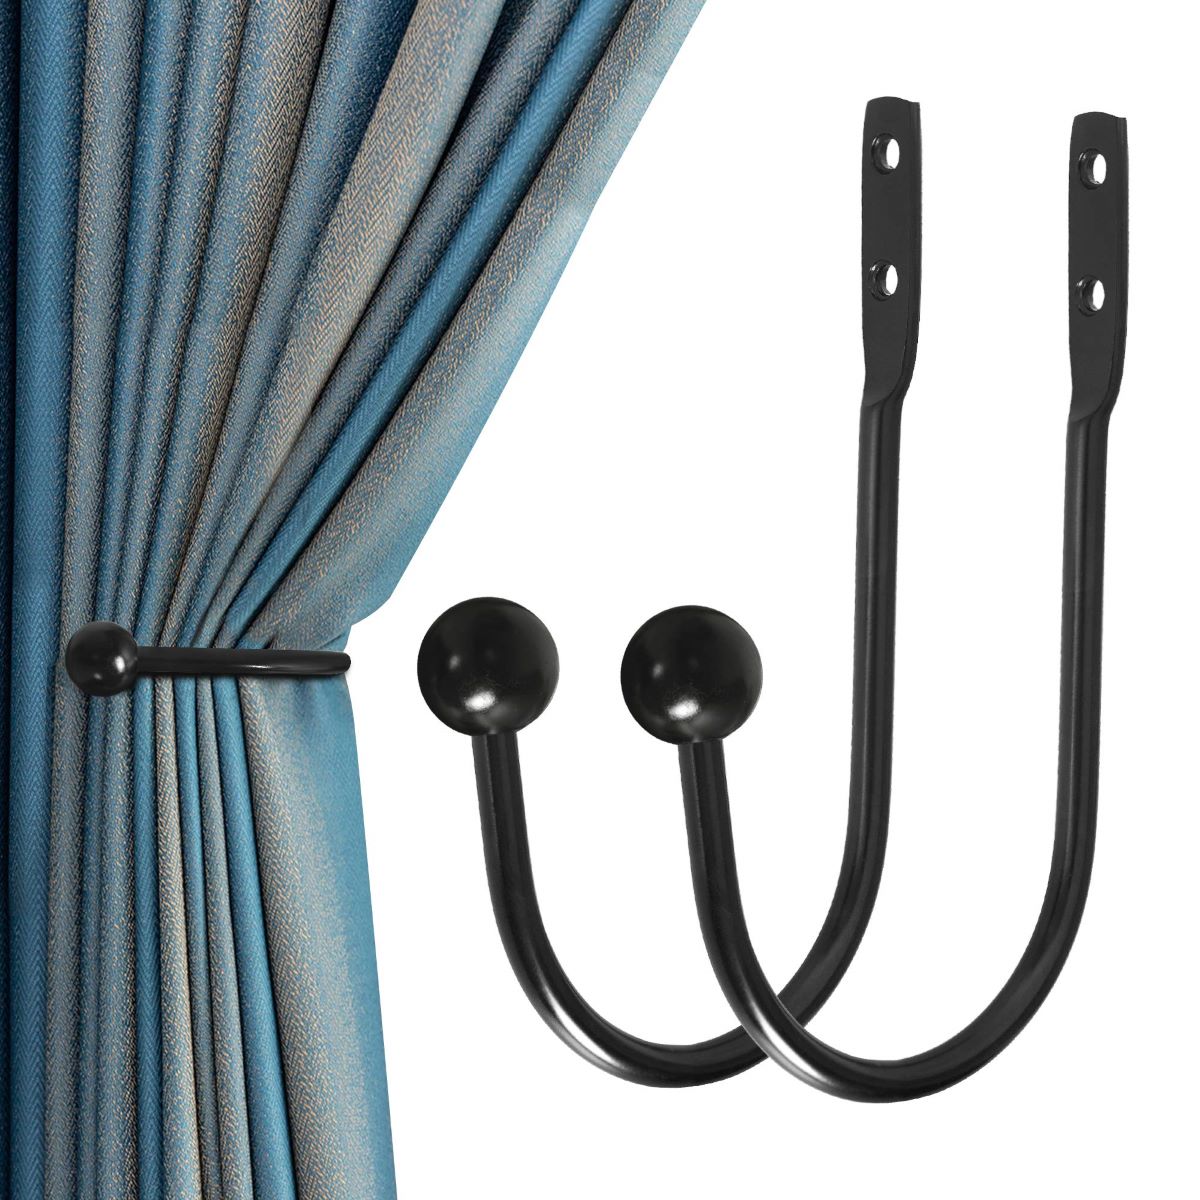 No-drill Curtain Hook Effortlessly Organize Home with Adjustable S-shaped Curtain  Hooks for Bathroom Living Spaces